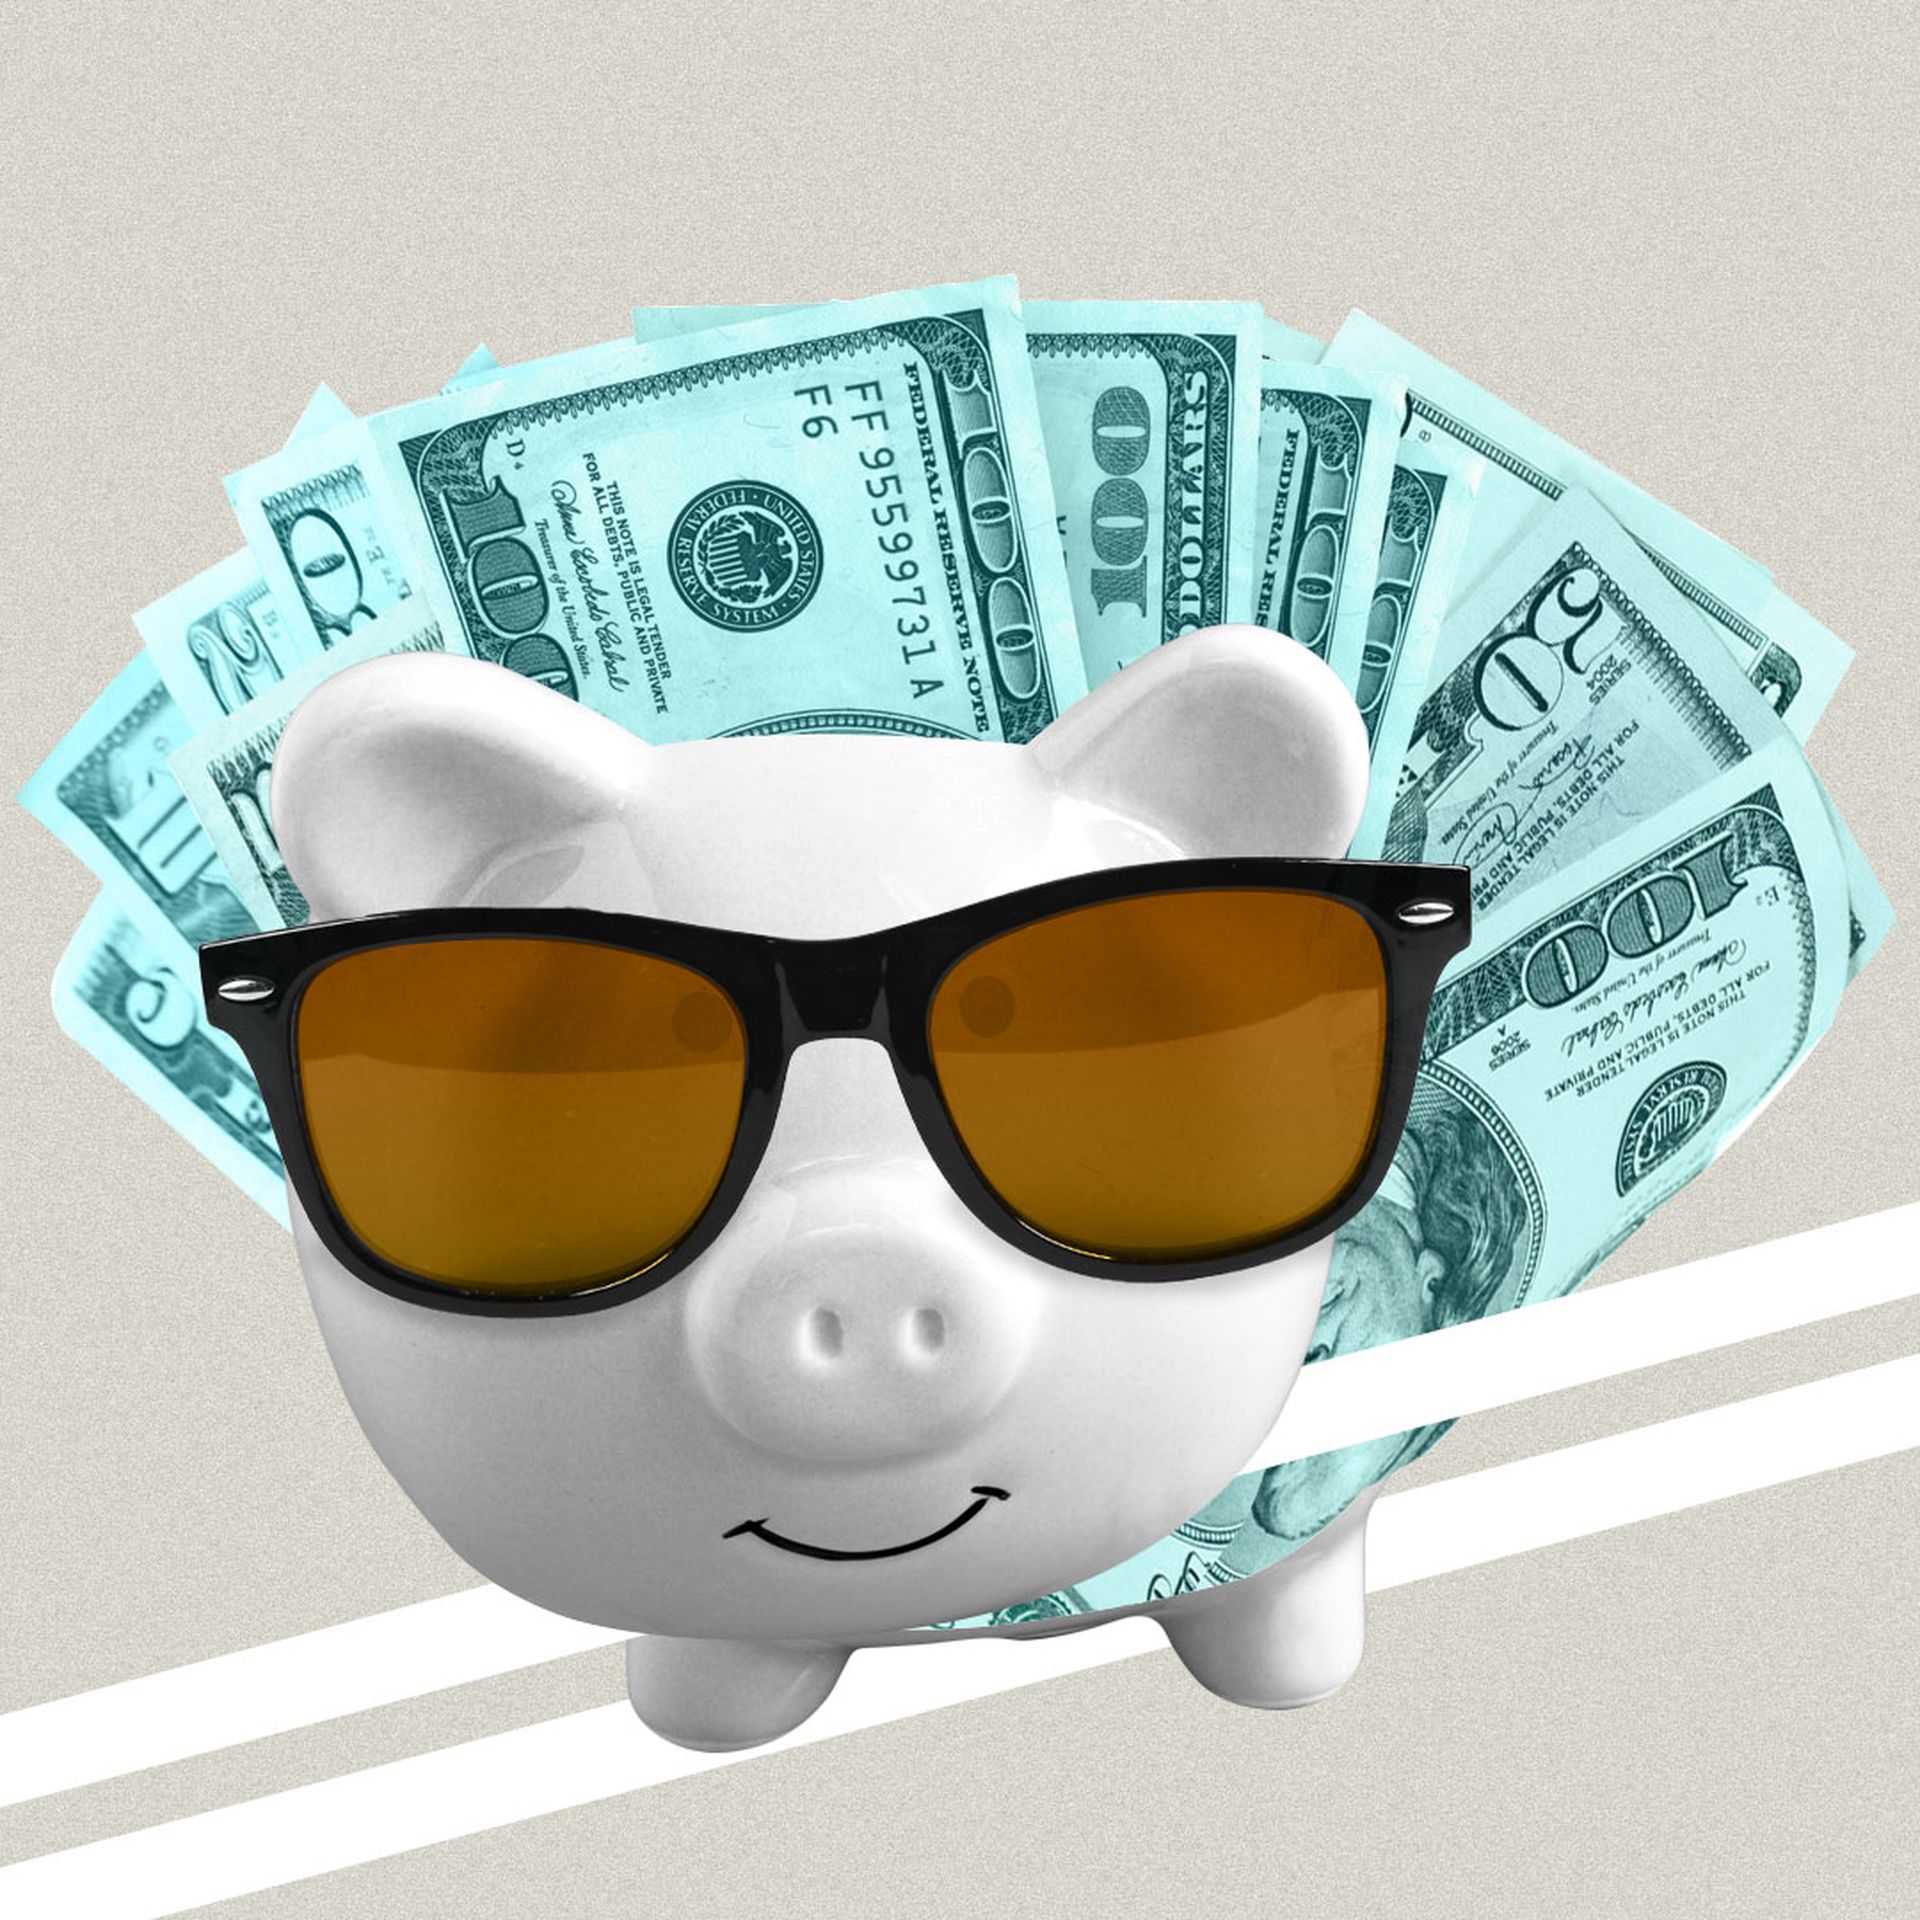 Illustration of piggy bank with sunglasses. Dollar bills sticking out of the piggy bank.